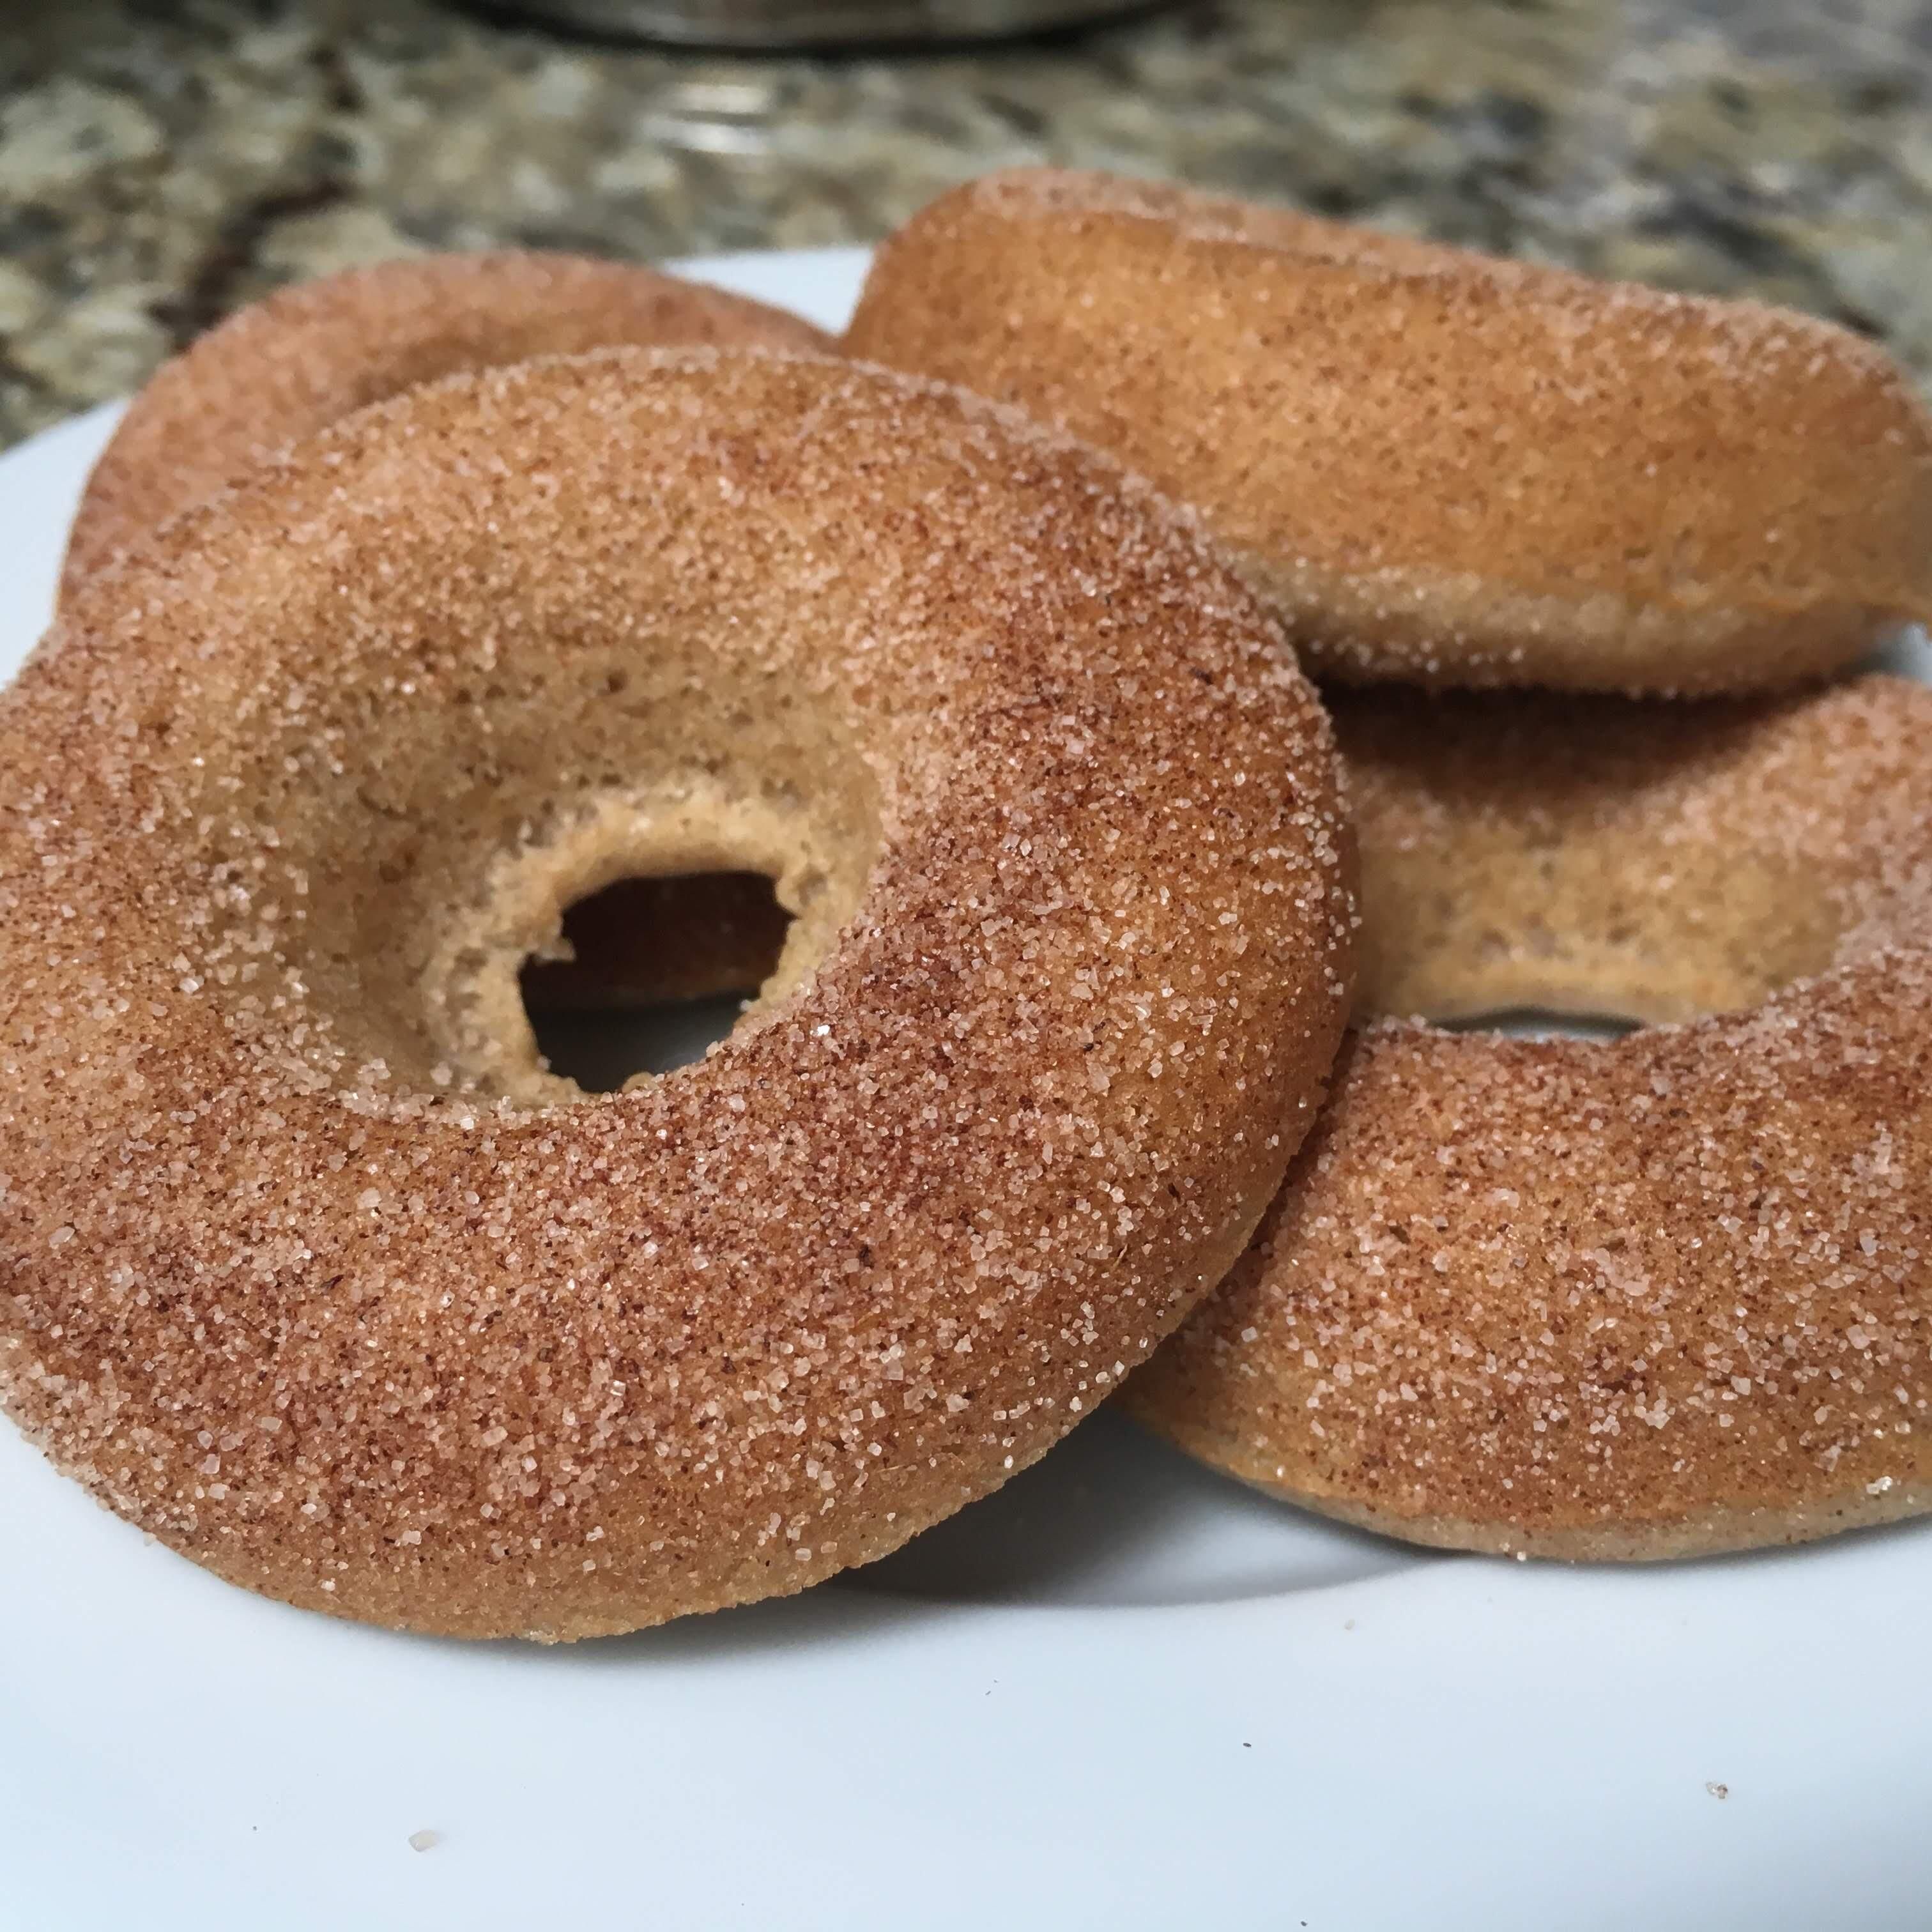 apple cider donuts on plate